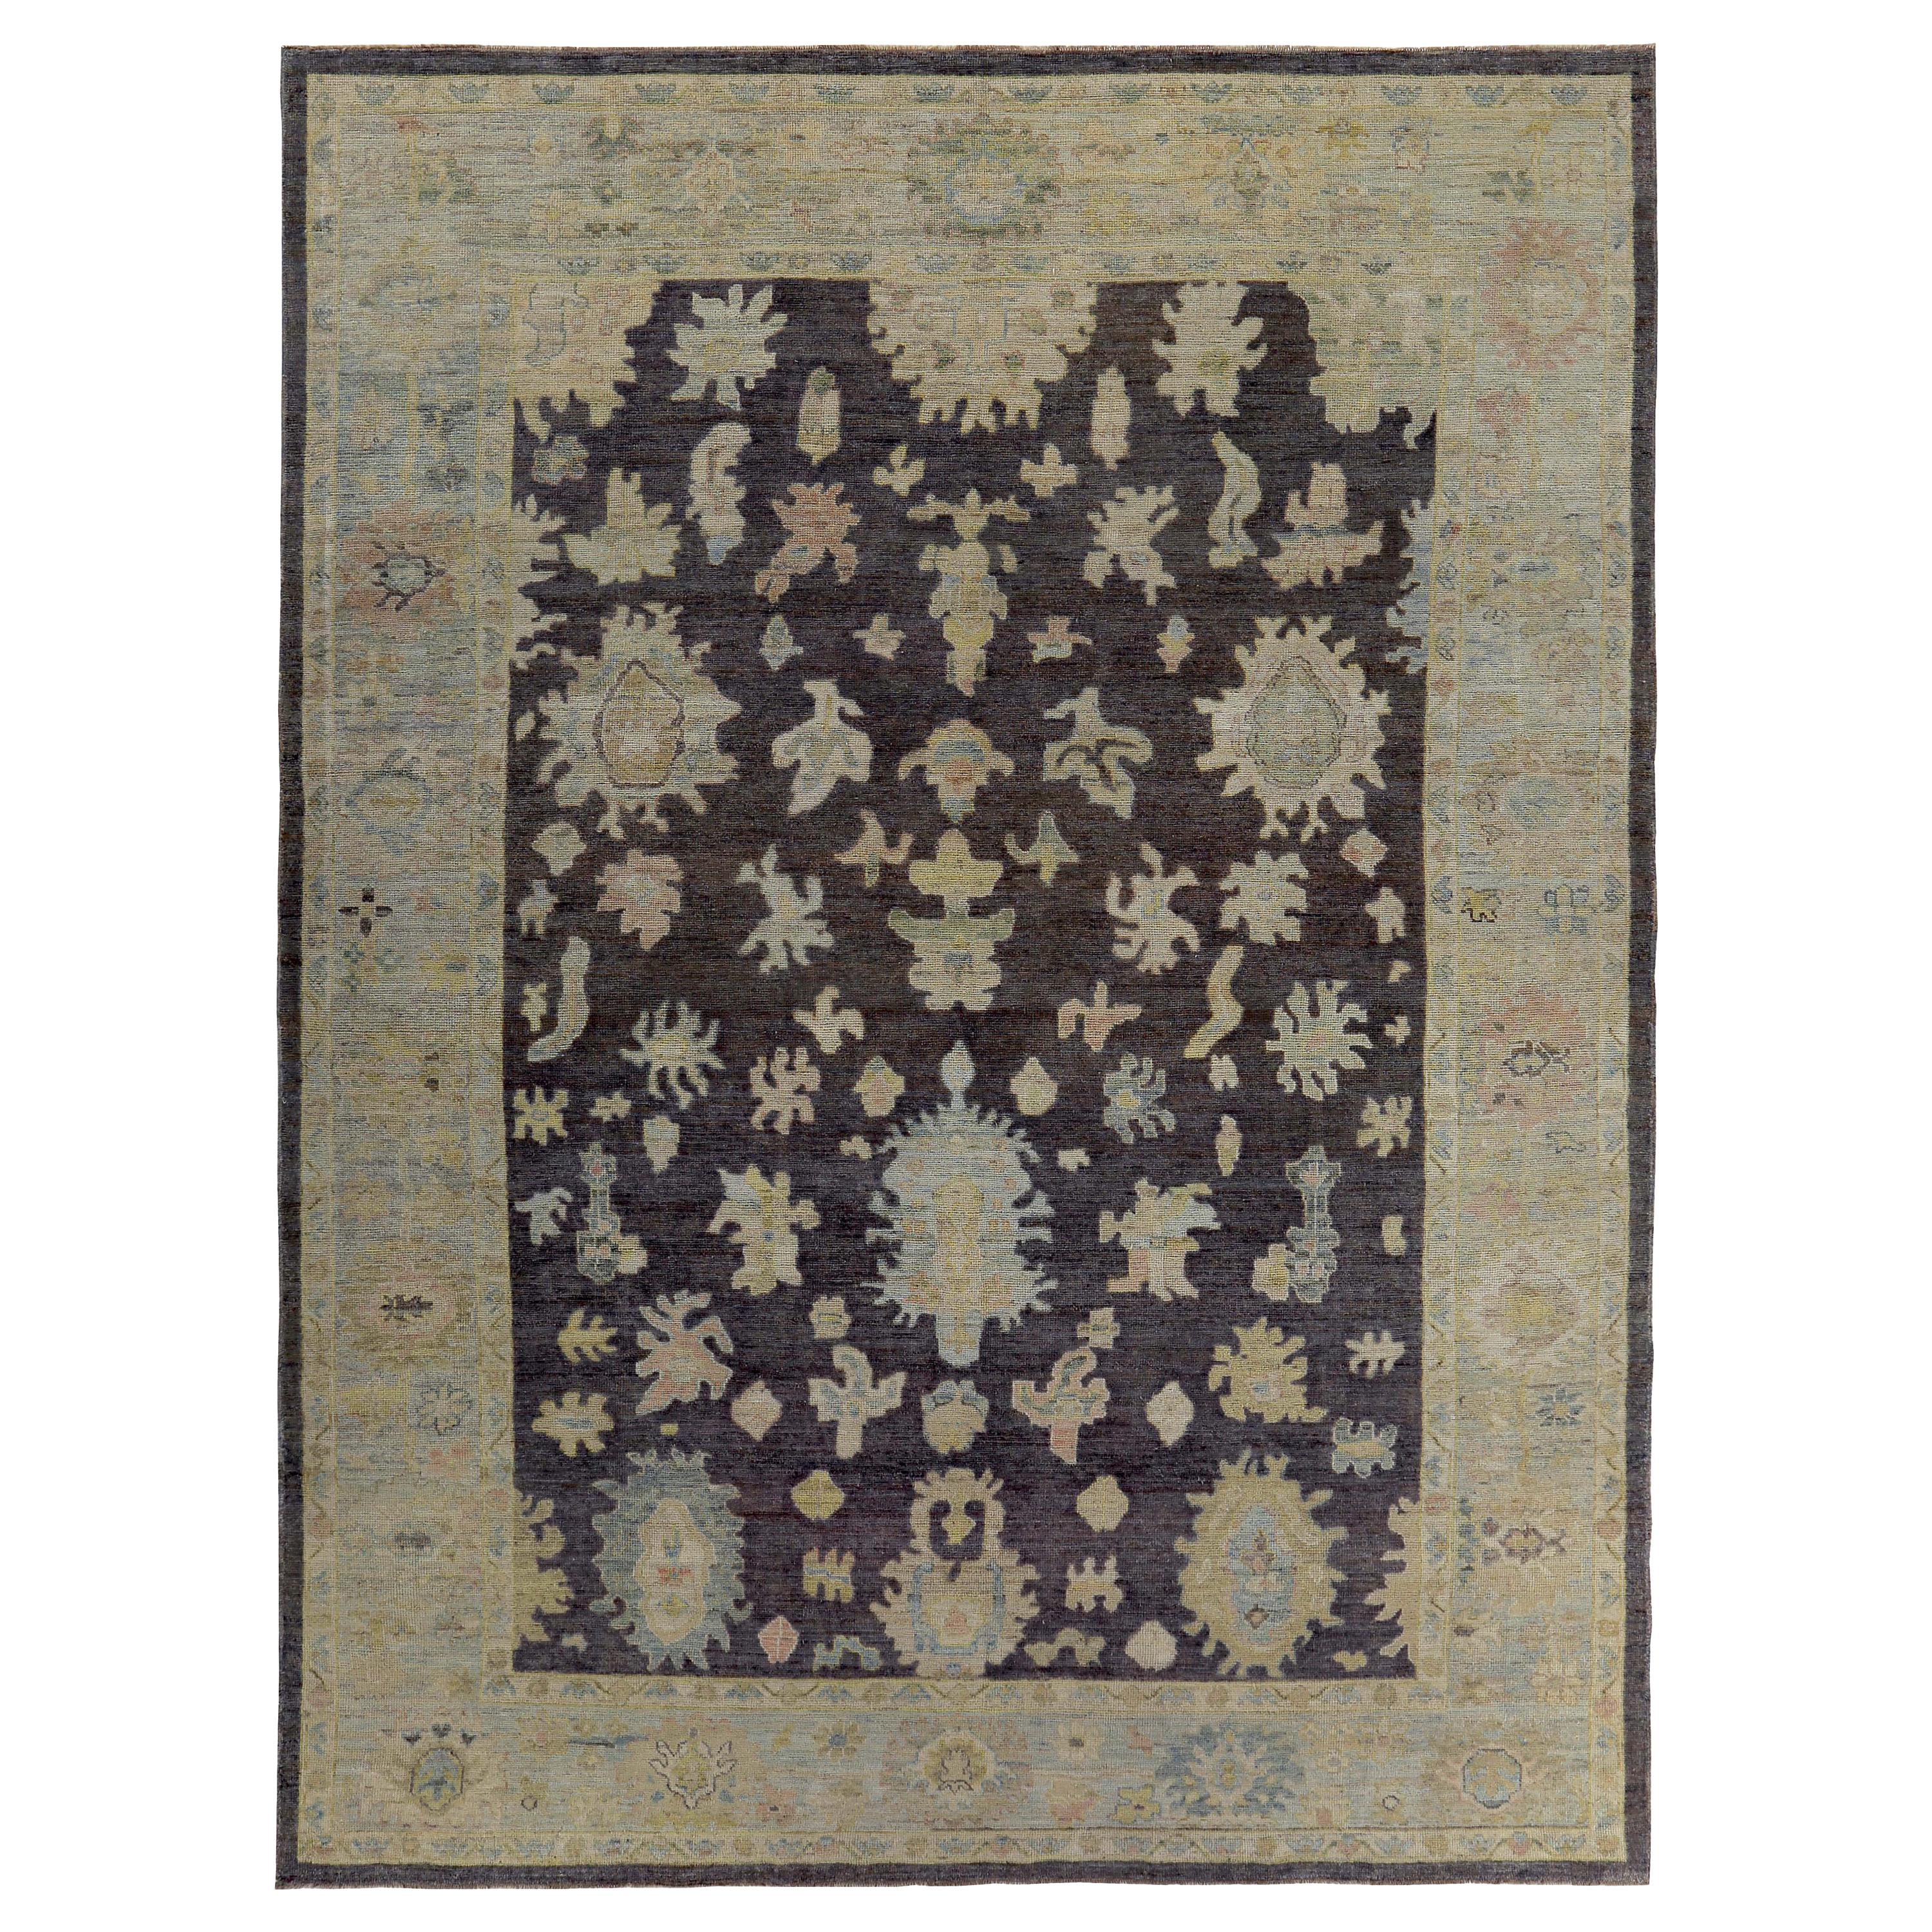 New Turkish Oushak Rug with Yellow and Green Floral Details on Brown Field